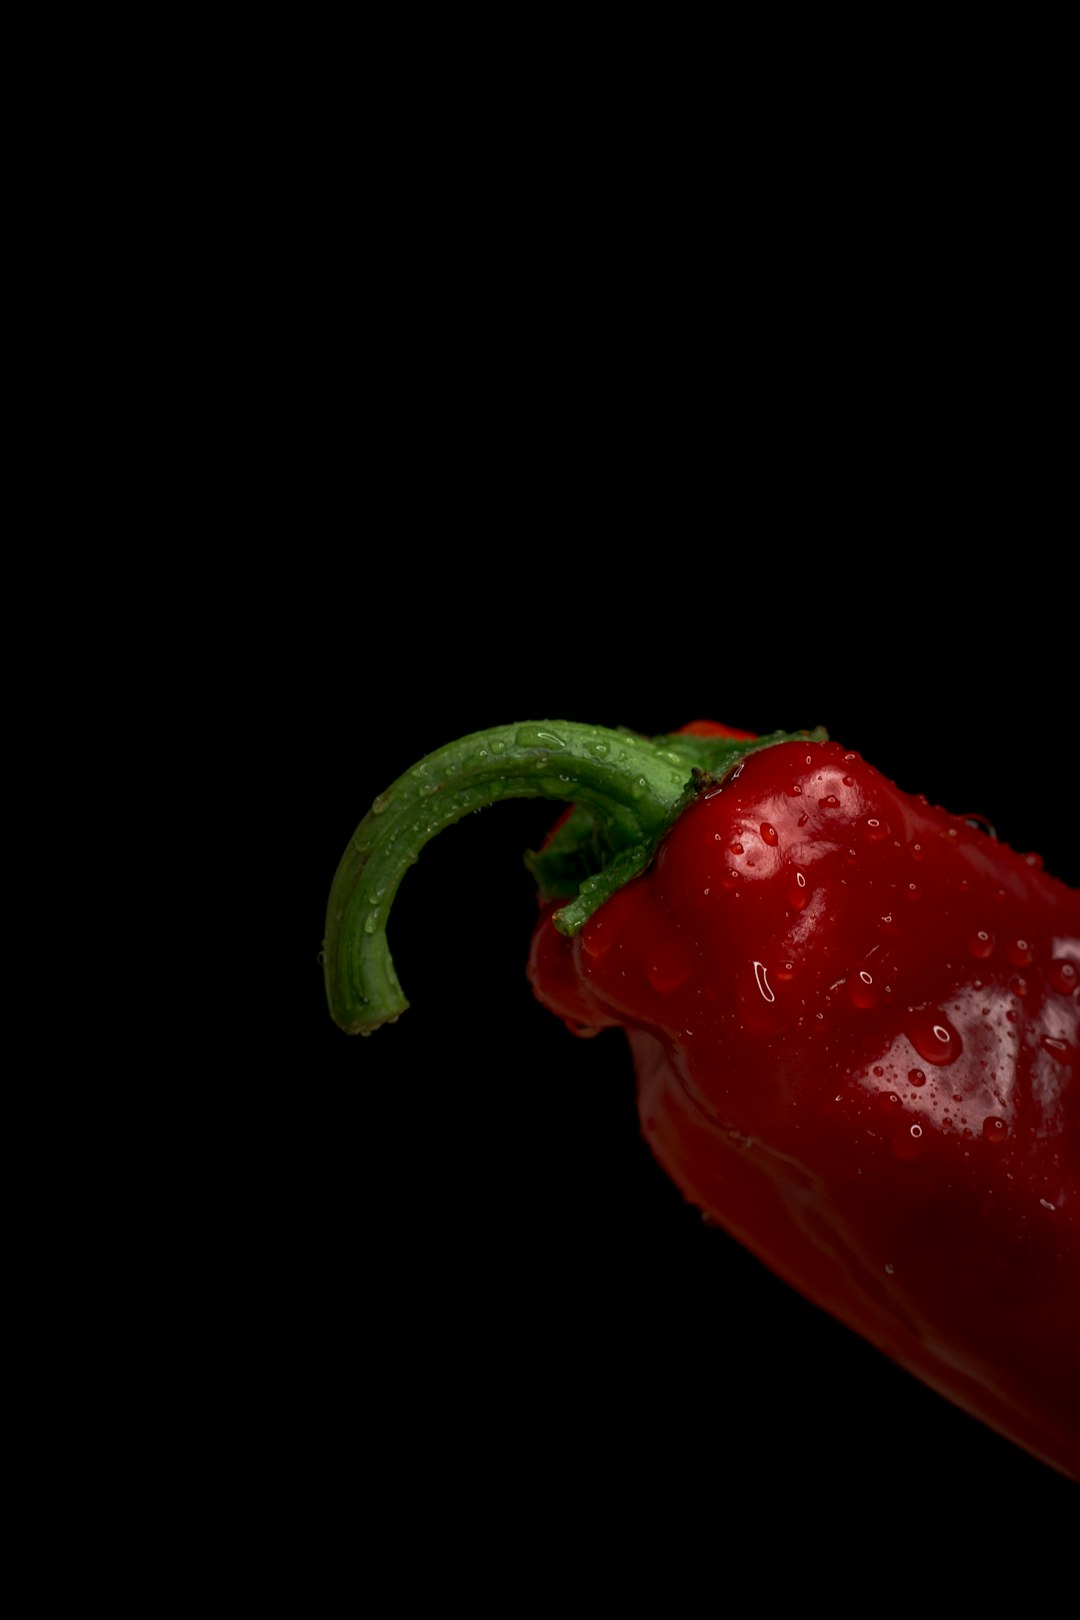 red bell pepper with green stem